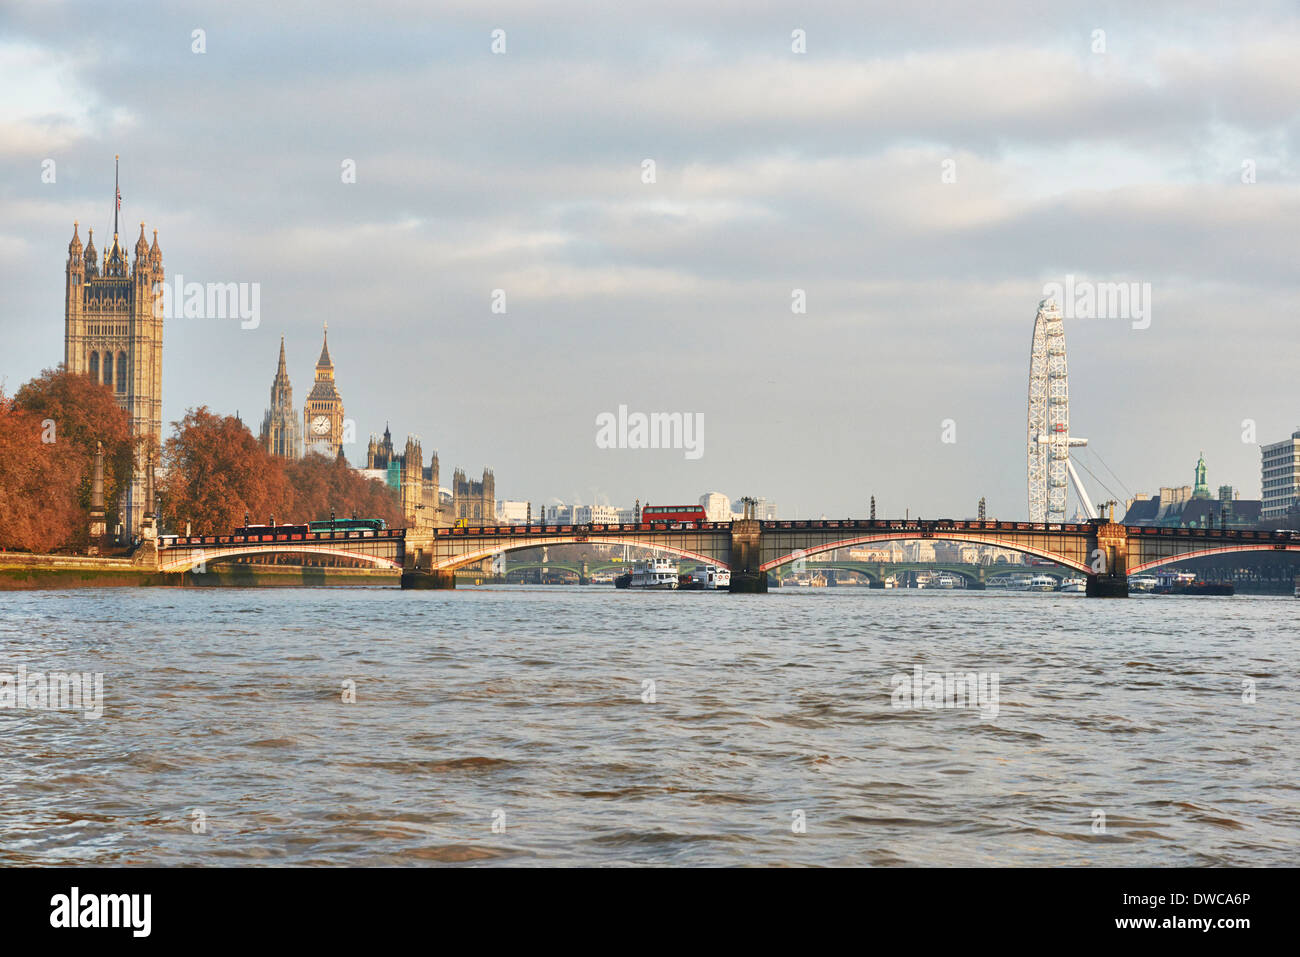 View of Lambeth Bridge and Houses of Parliament on the Thames, London, UK Stock Photo